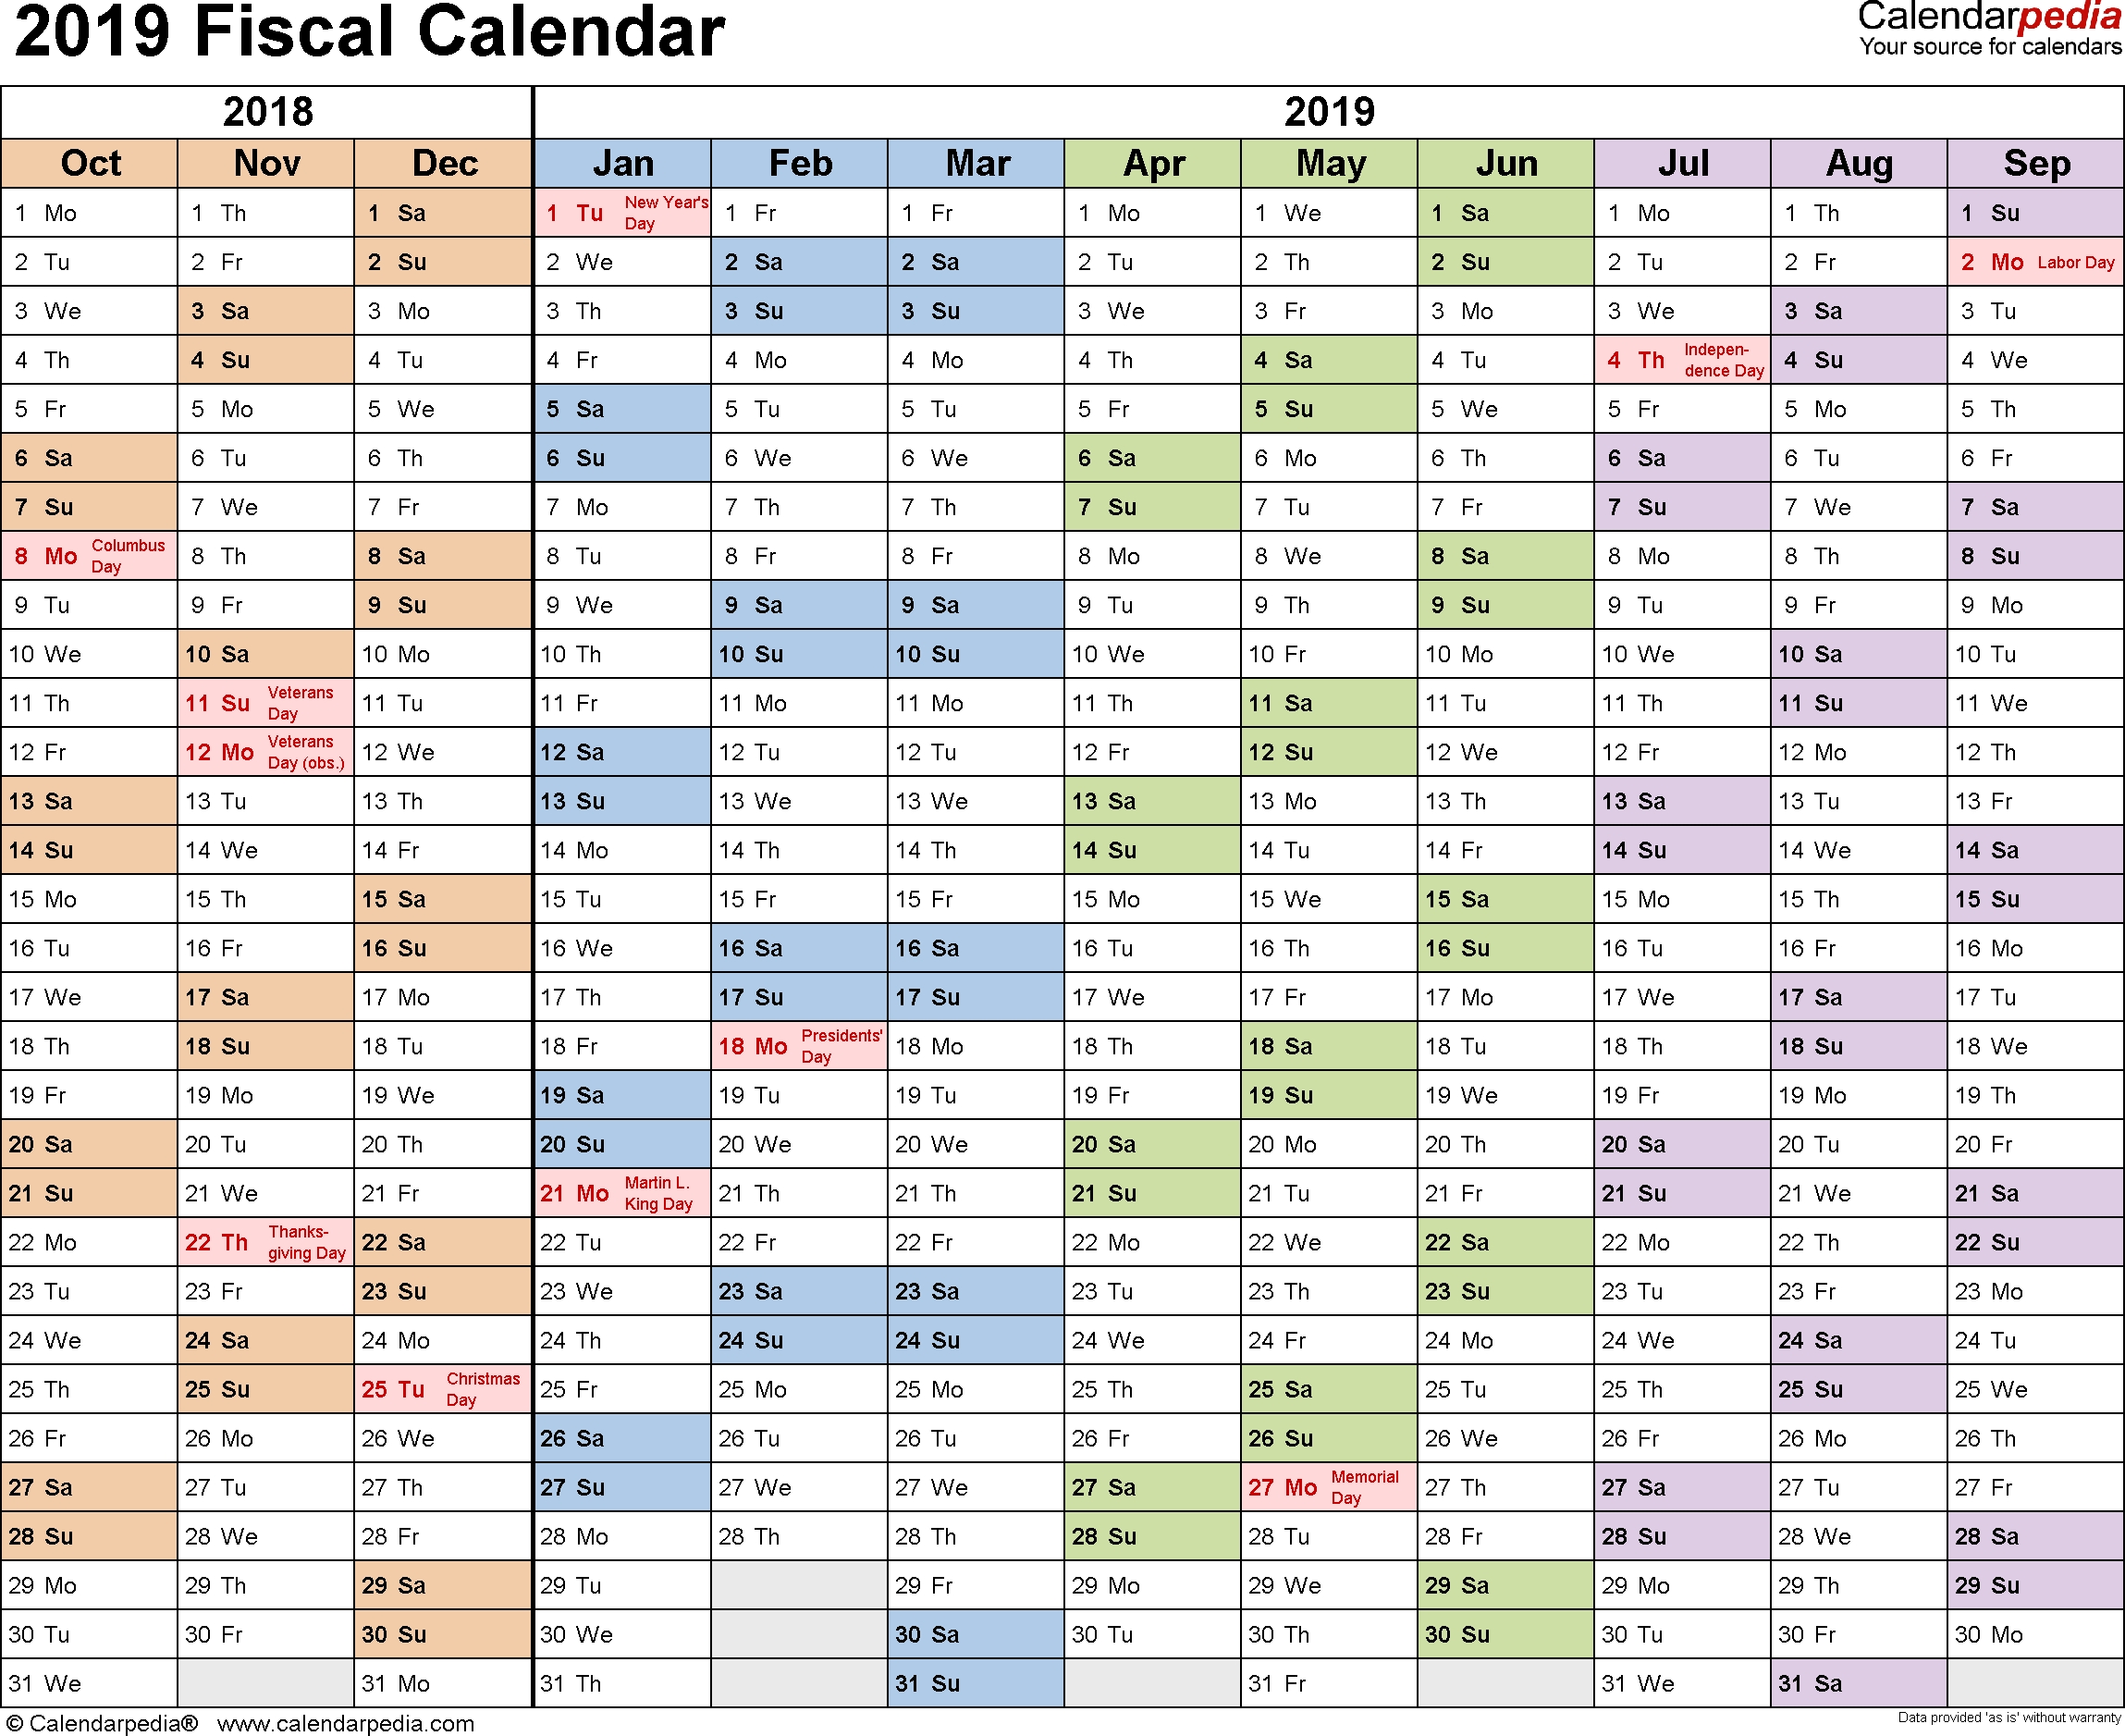 Fiscal Calendars 2019 - Free Printable Word Templates Remarkable Fiscal Year Calendar 2020 Printable